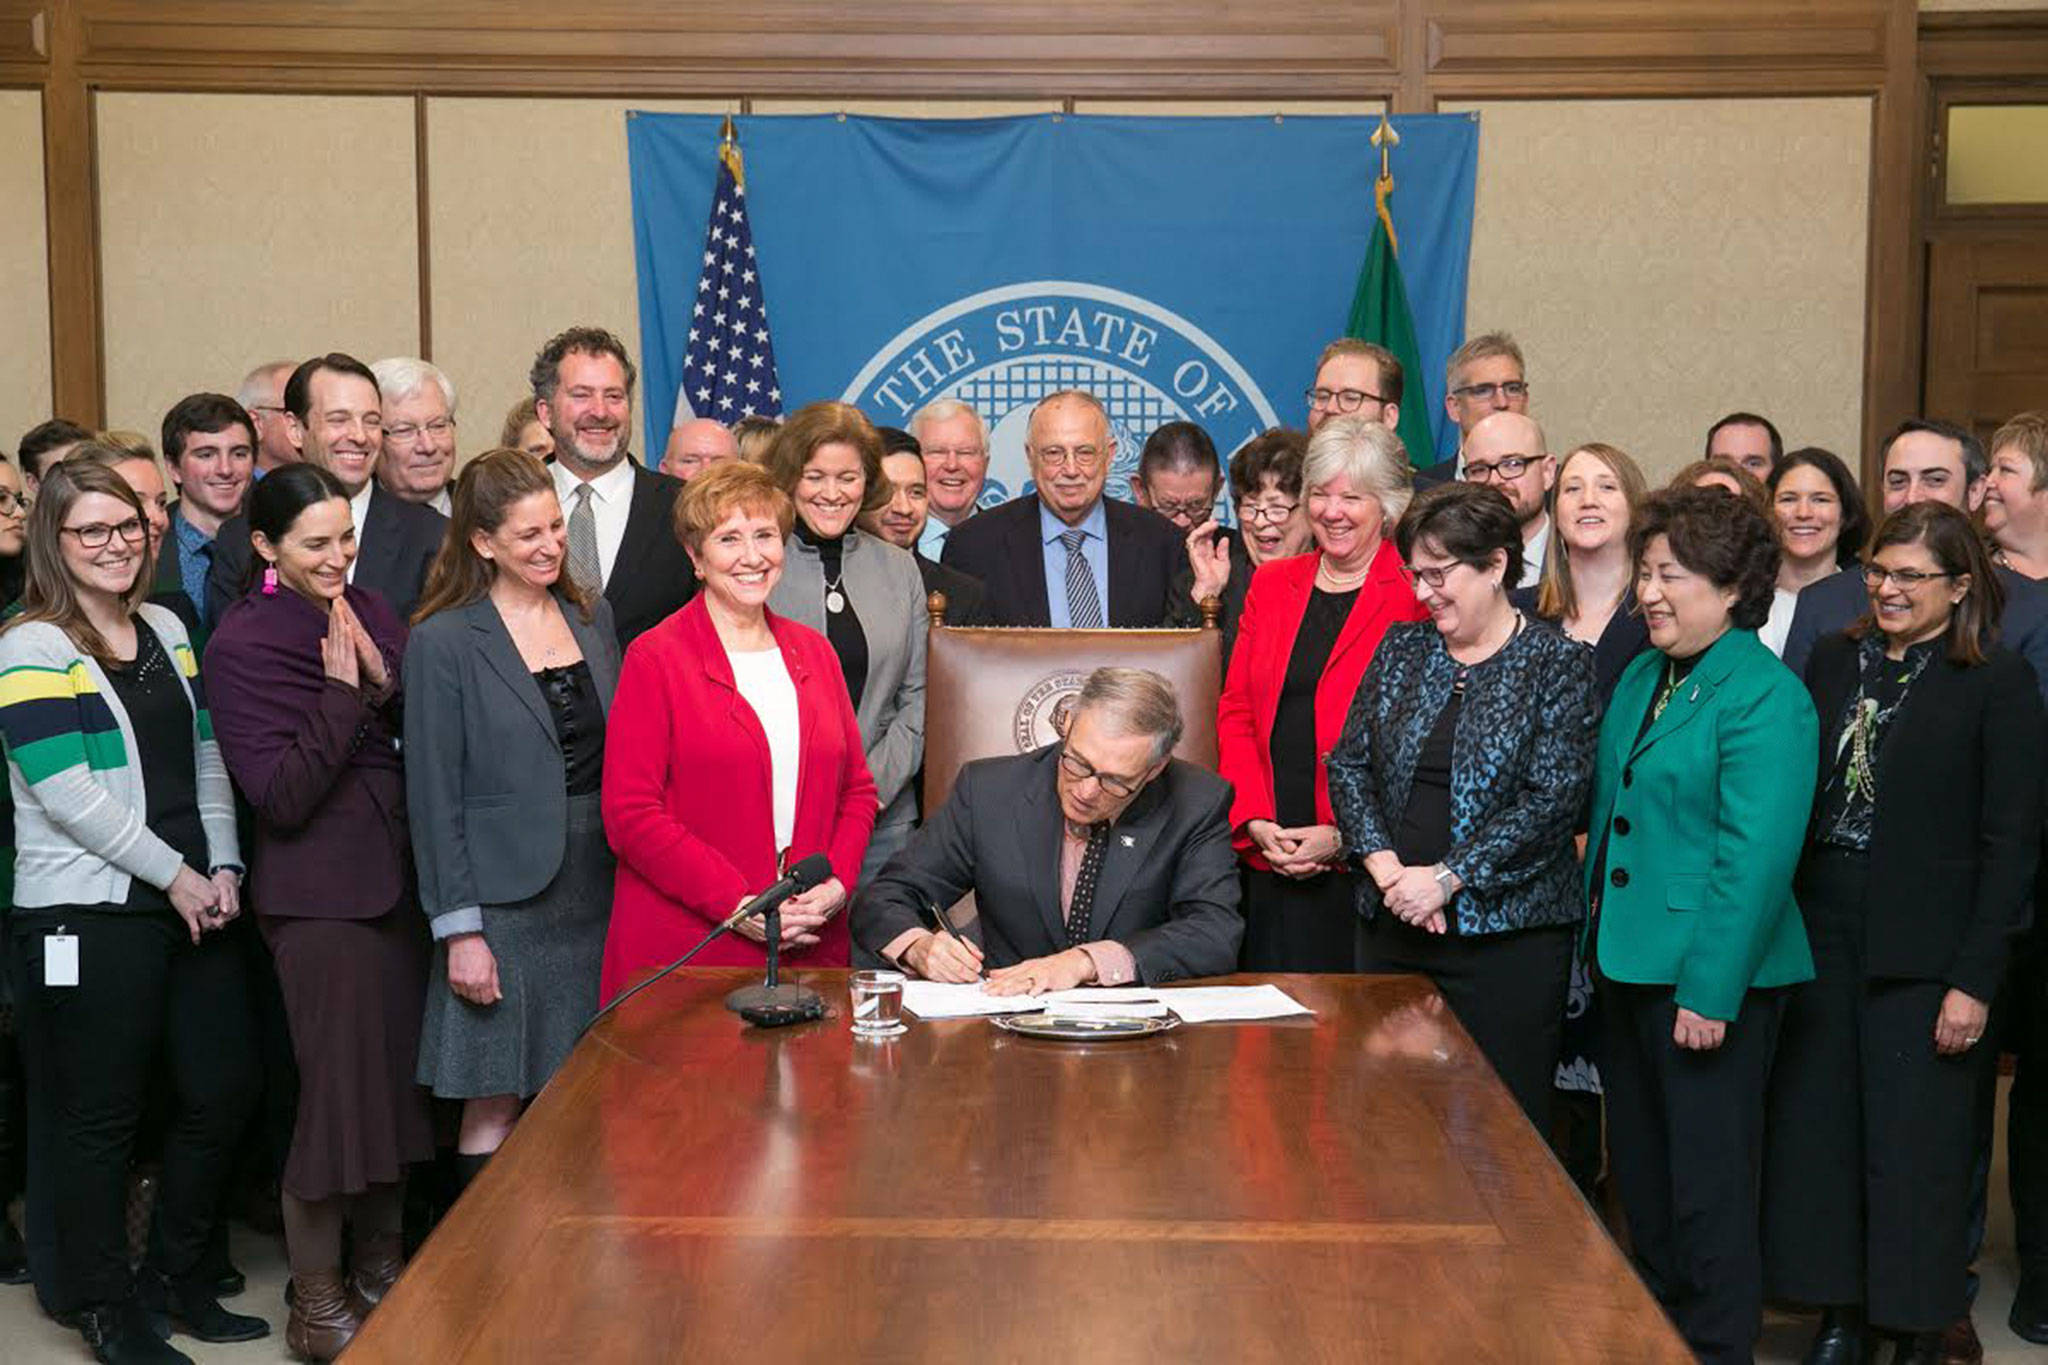 Gov. Jay Inslee signs Engrossed Senate Bill No. 5023. Relating to delaying implementation of revisions to the school levy lid. Primary Sponsor: Lisa Wellman